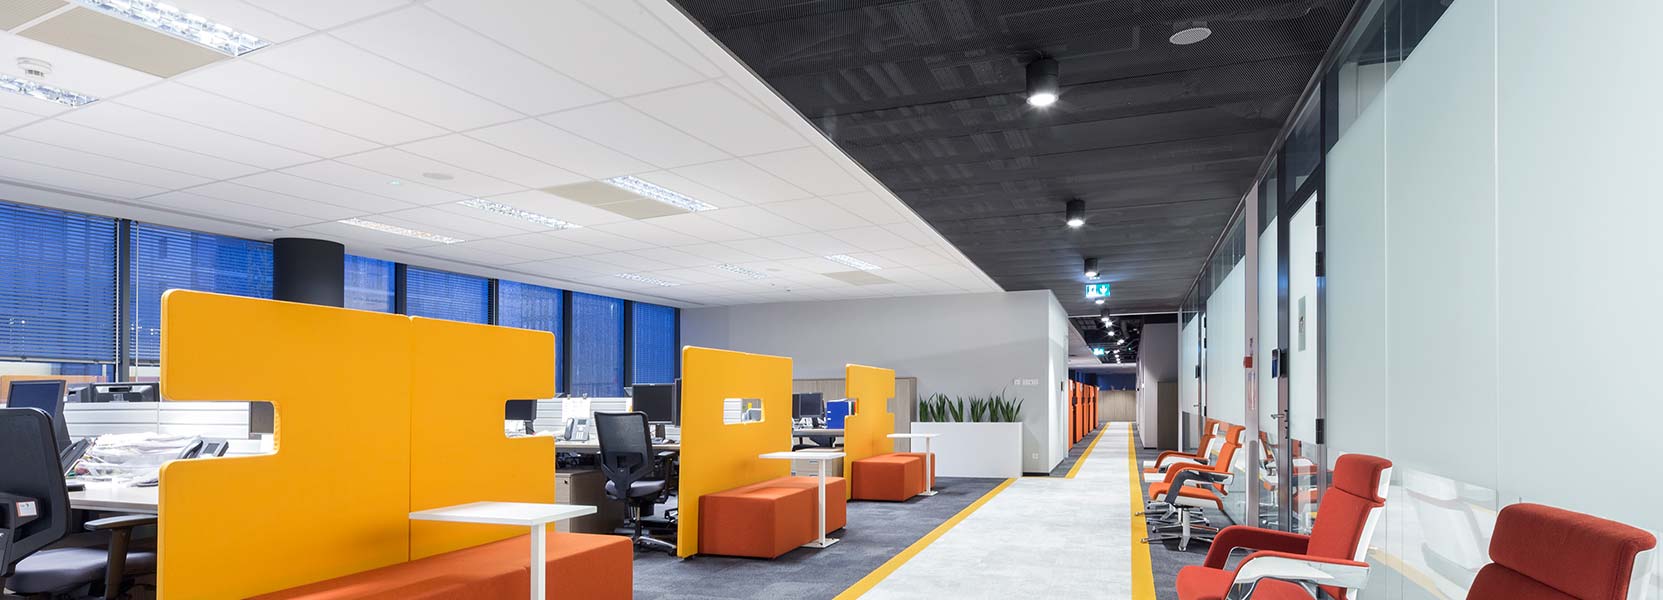 Knauf Armstrong Mesh Lay-In tile in an office interior